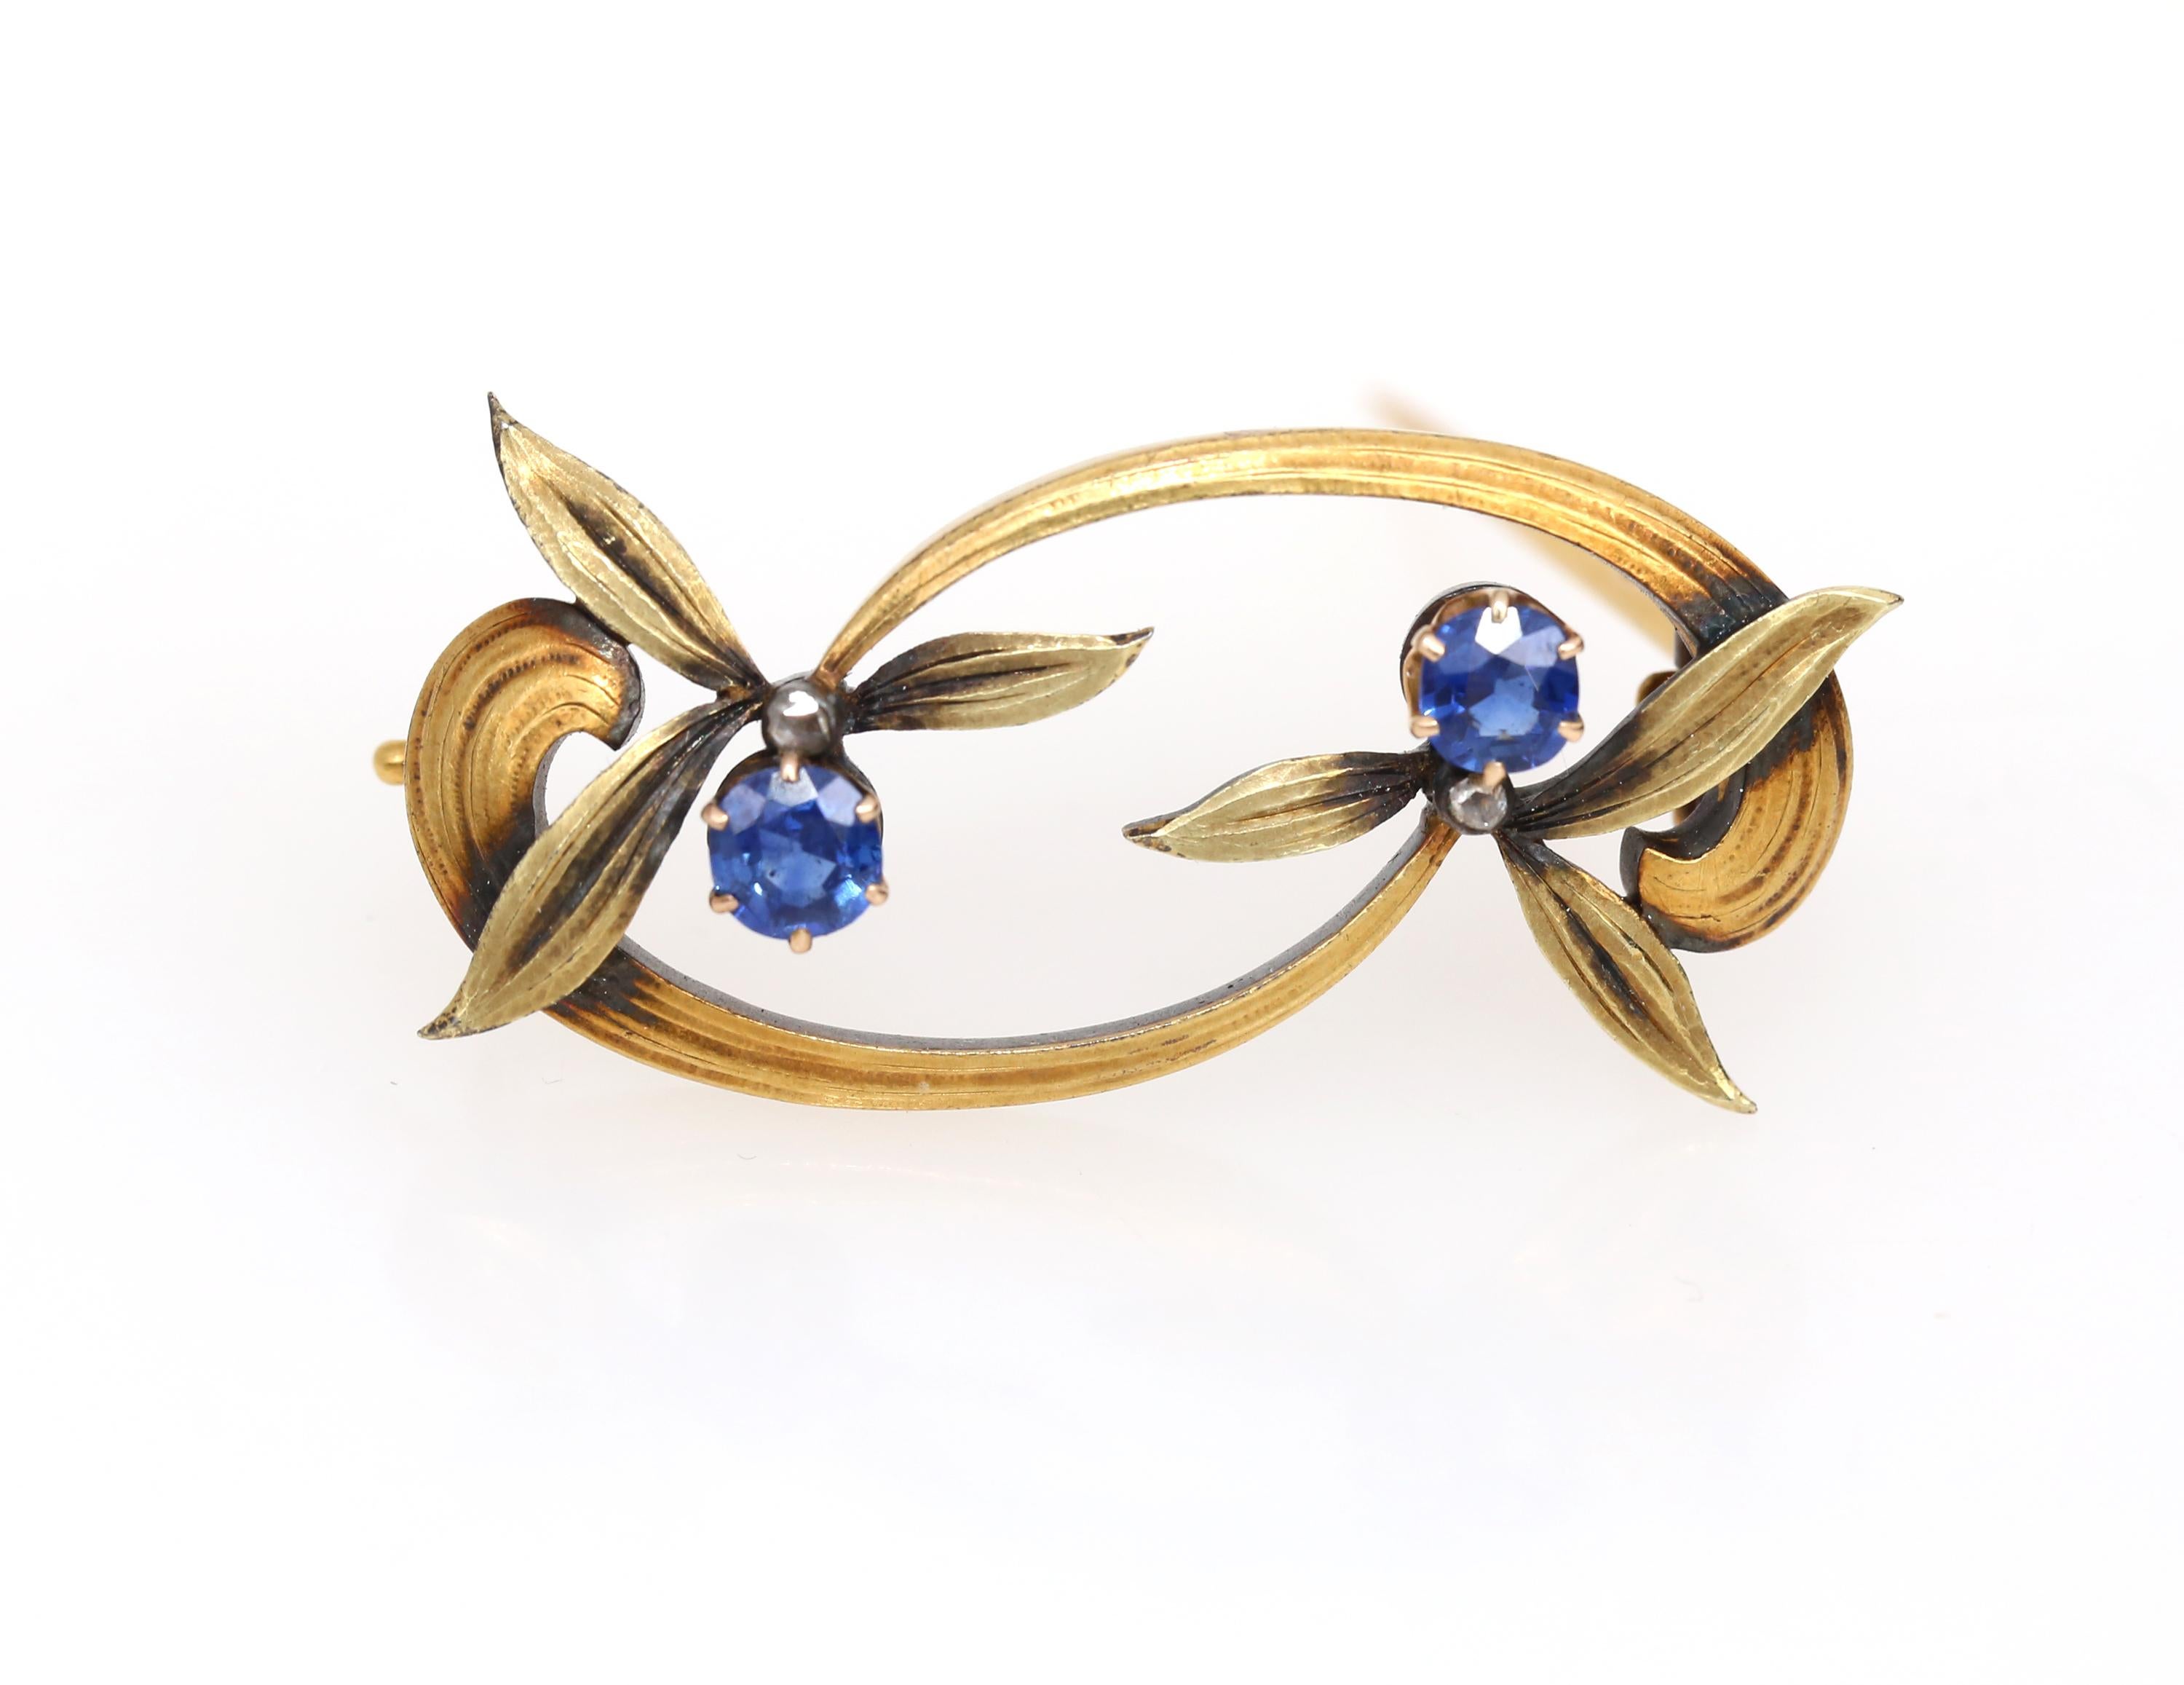 Russian Faberge Sapphire Floral Brooch Pin in Original Box.
An extremely rare example of the famous Russian Jewelry House Faberge. Stamped in Cyrillic KF (Karl Faberge) 56 Gold Hallmark. The work is simply outstanding! The leaves are so delicate and